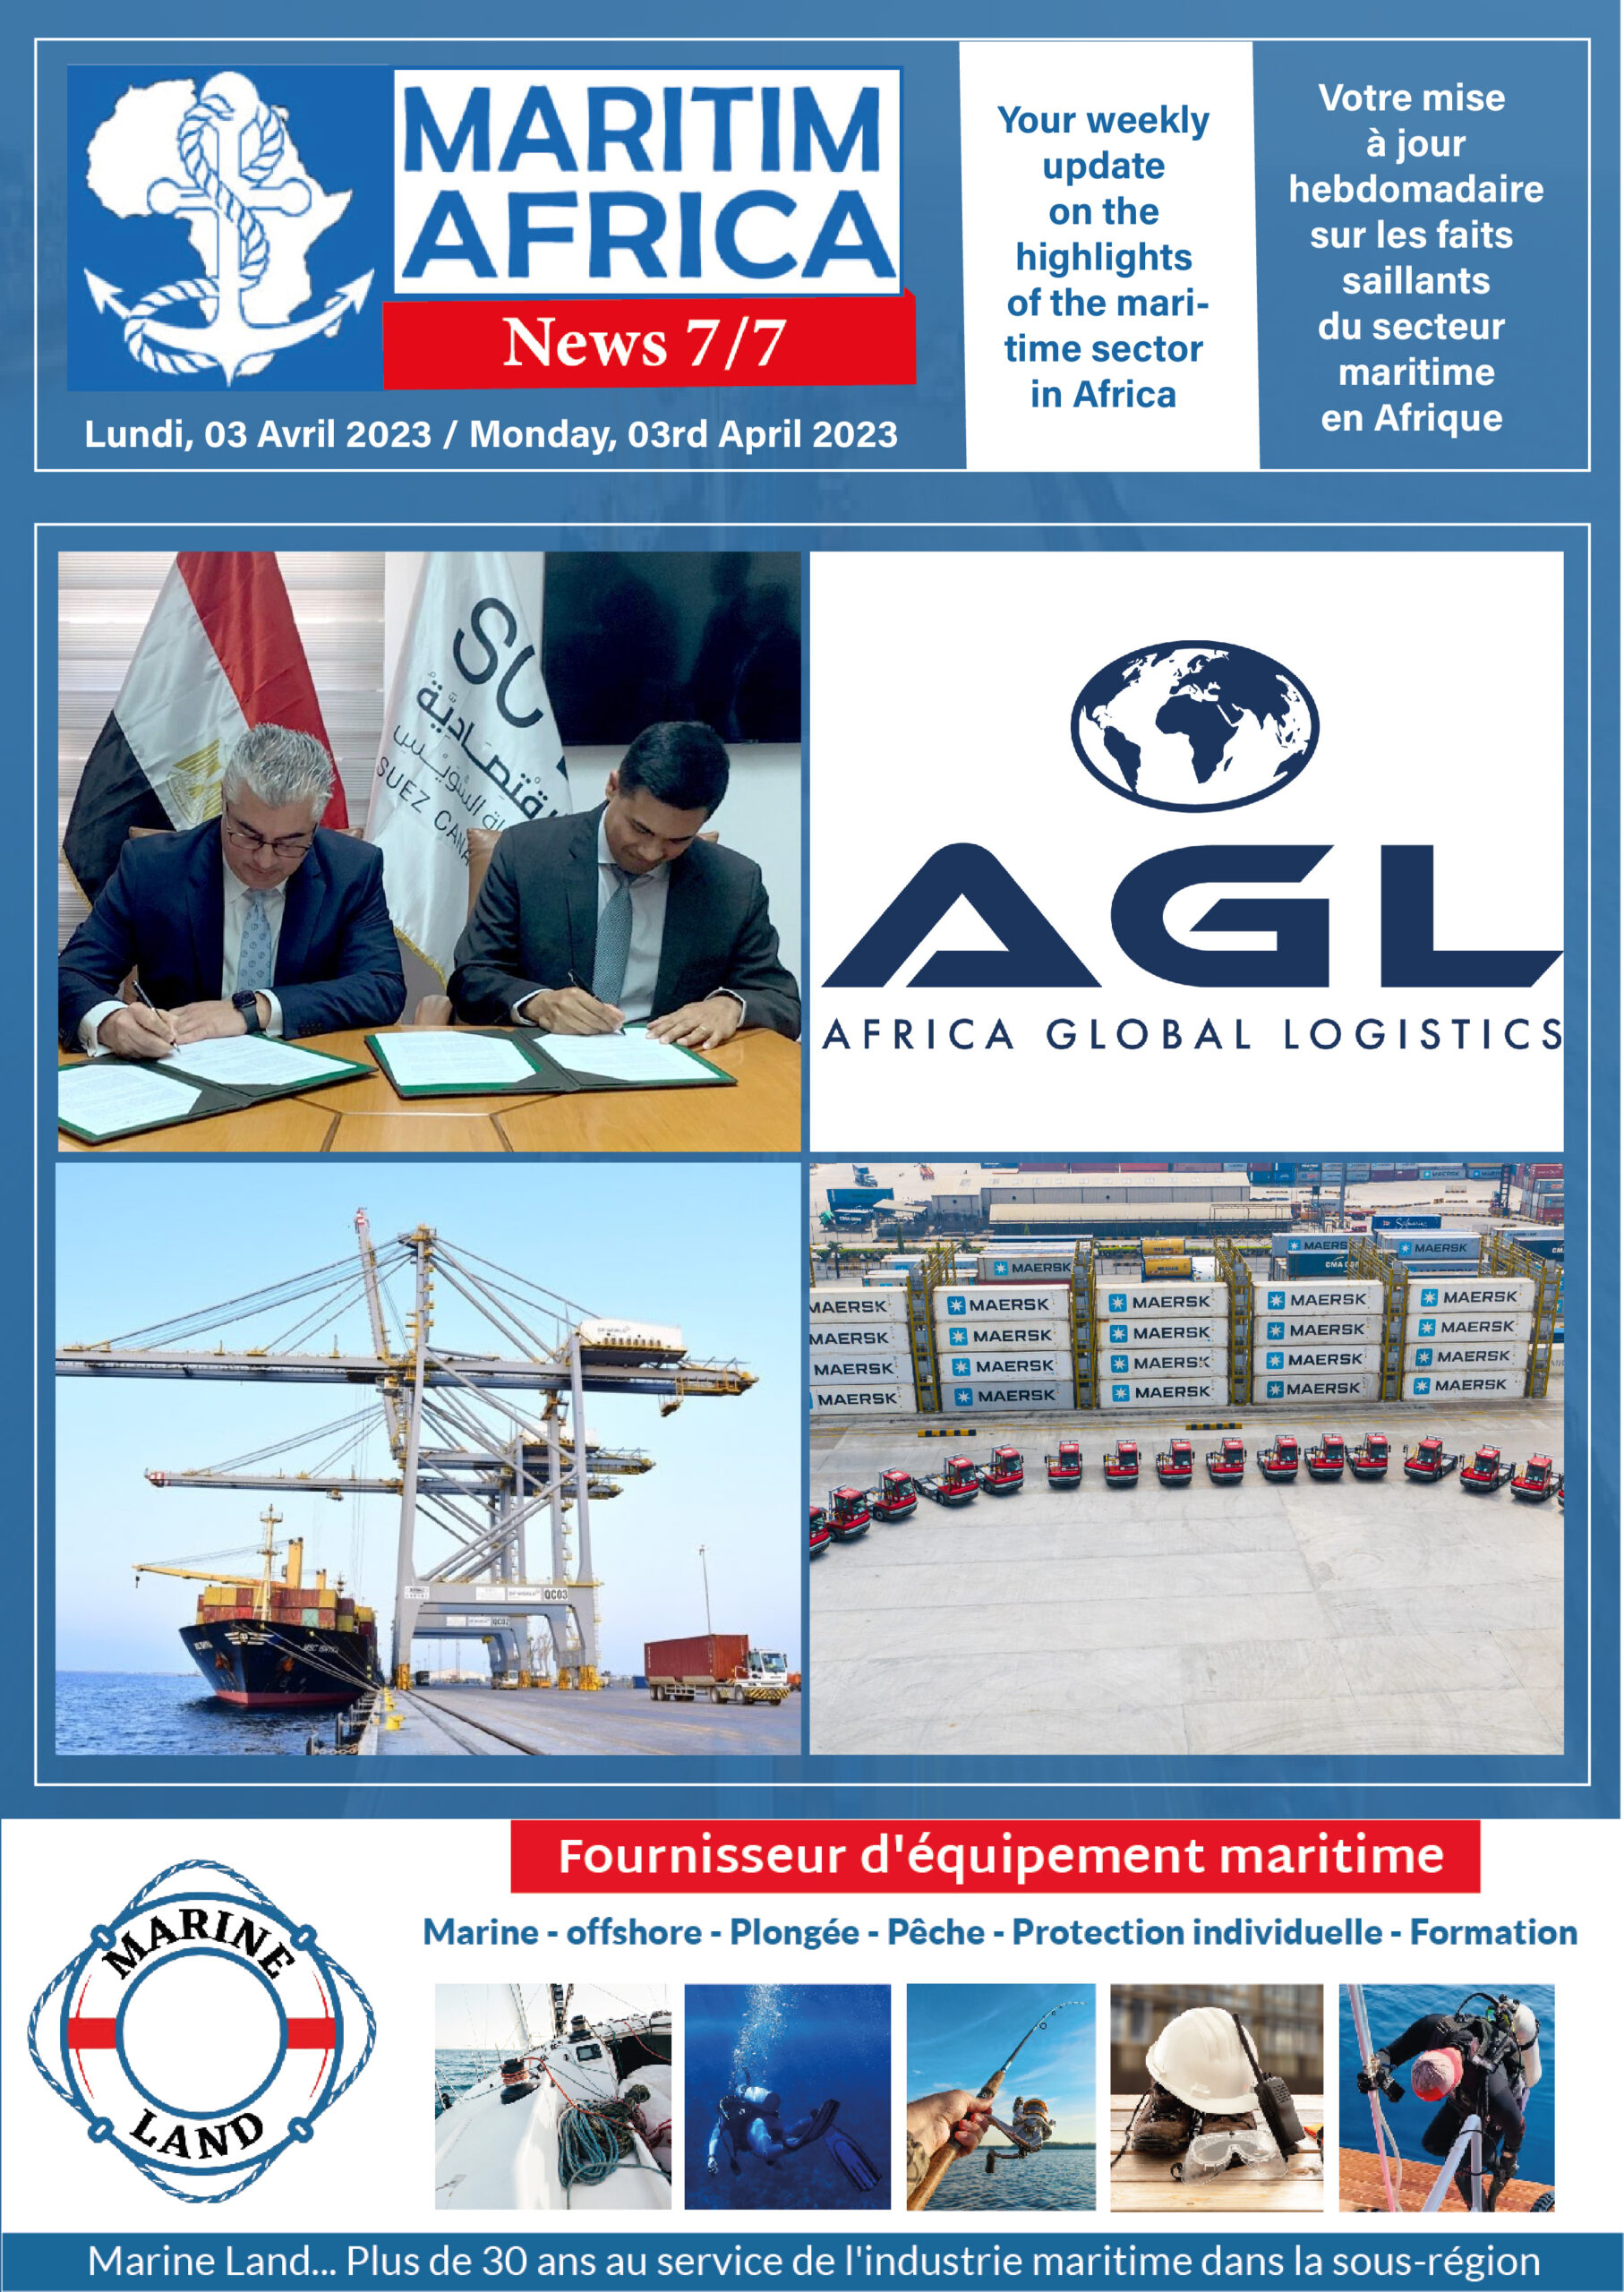 Maritimafrica News 7/7 (Week of 27 March  – 02 April 2023)